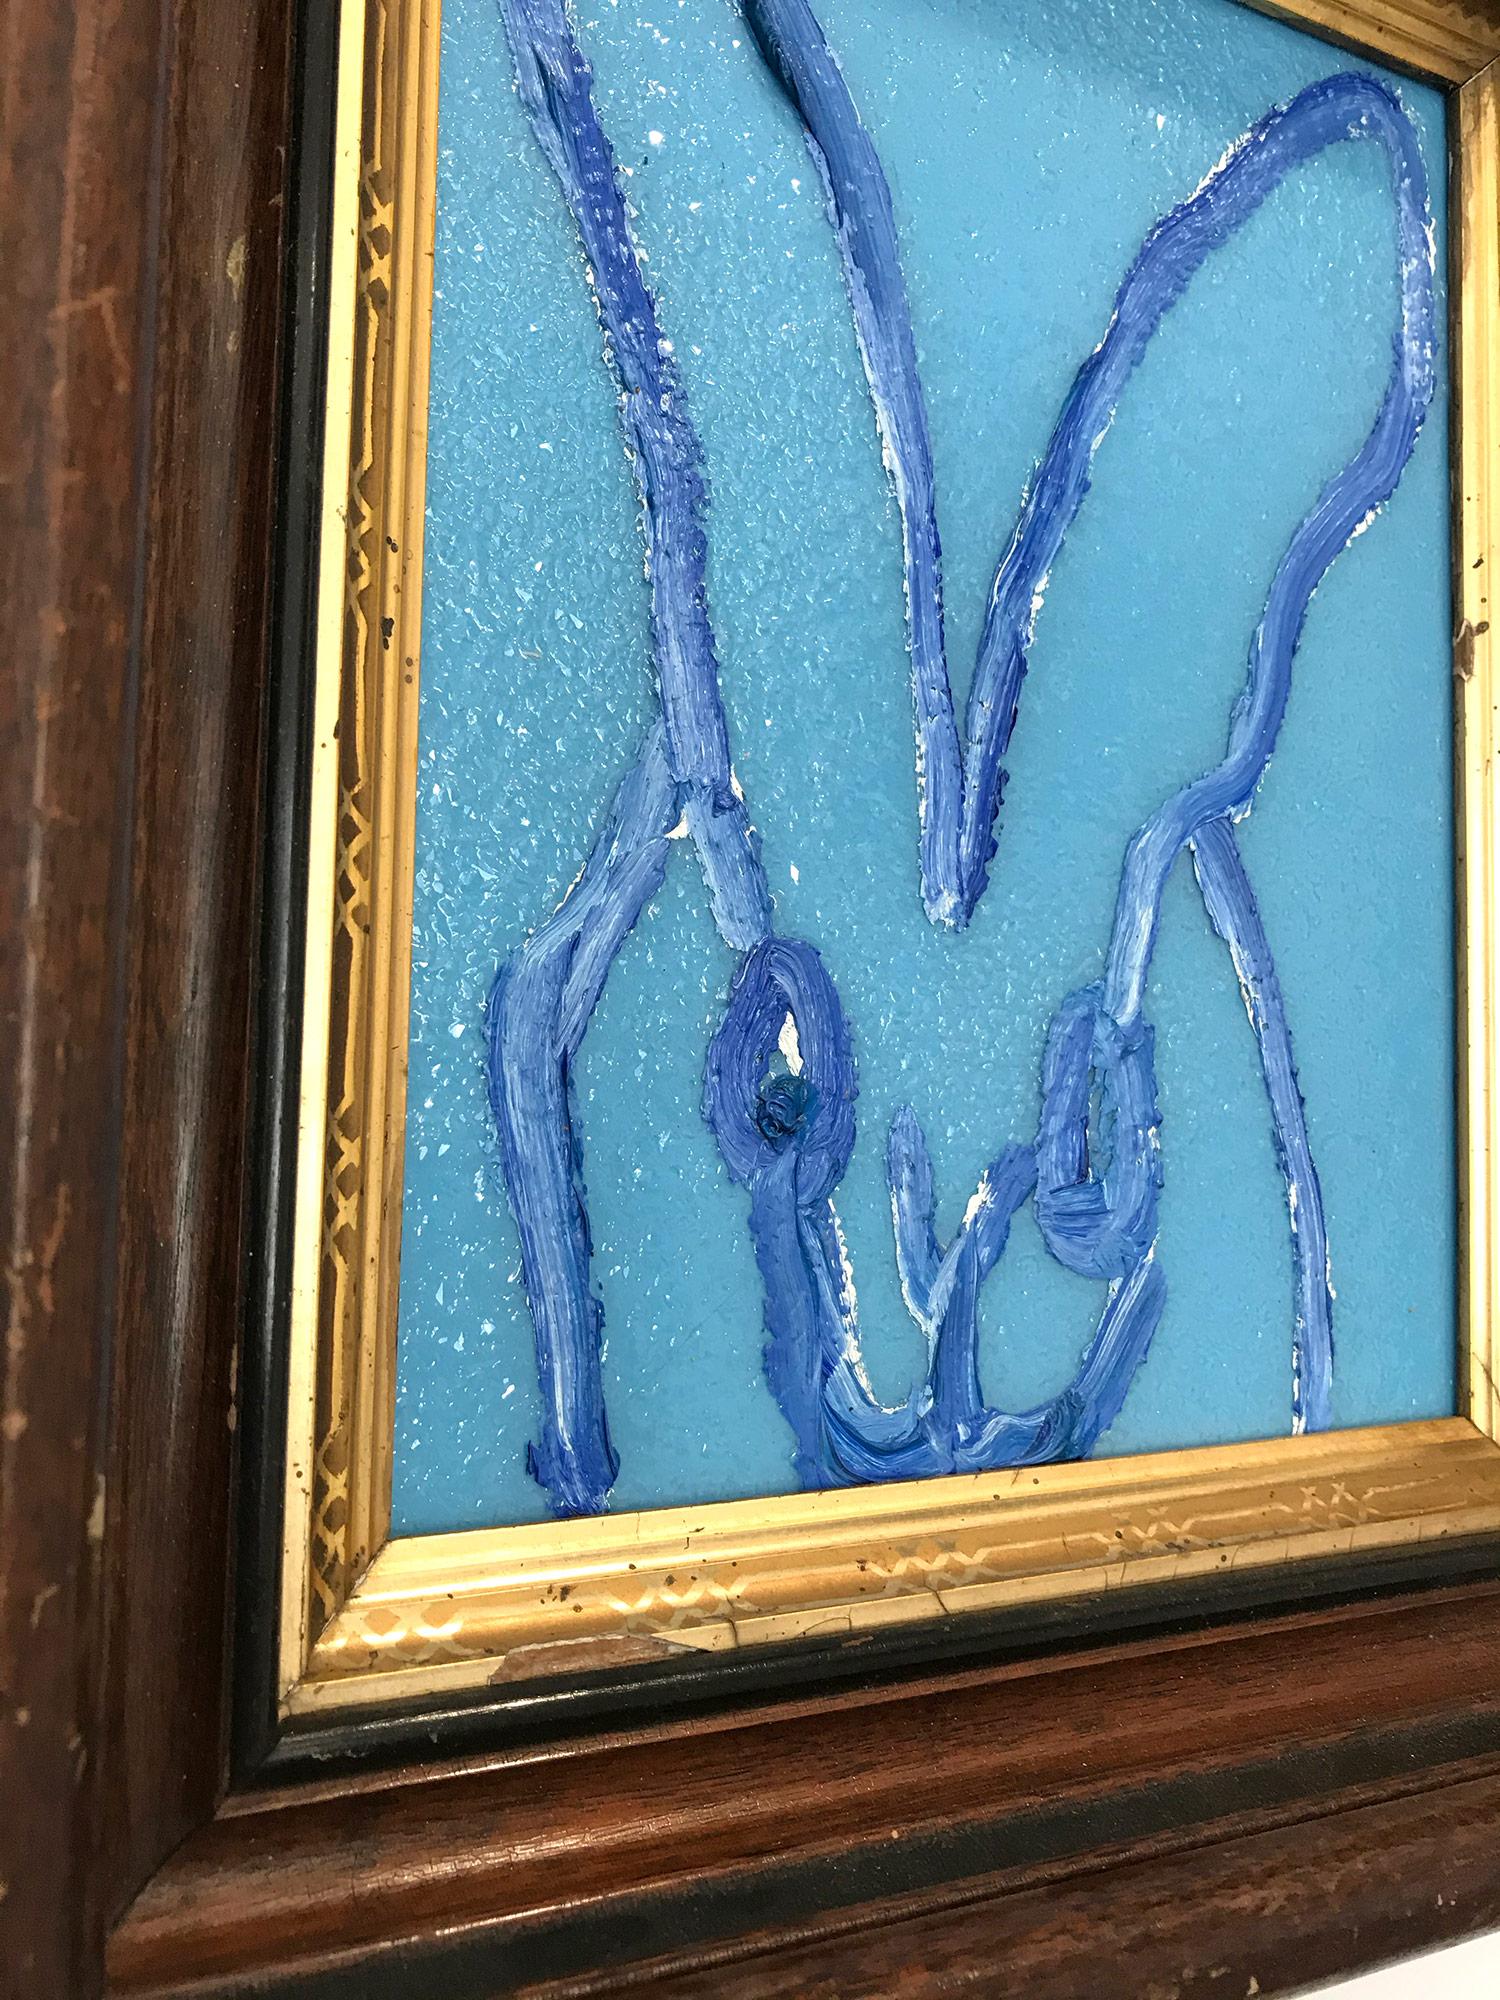 A wonderful composition of one of Slonem's most iconic subjects, Bunnies. This piece depicts a gestural figure of a light blue bunny on an light cobalt blue background with thick use of paint and diamond dust. It is housed in a wonderful antique